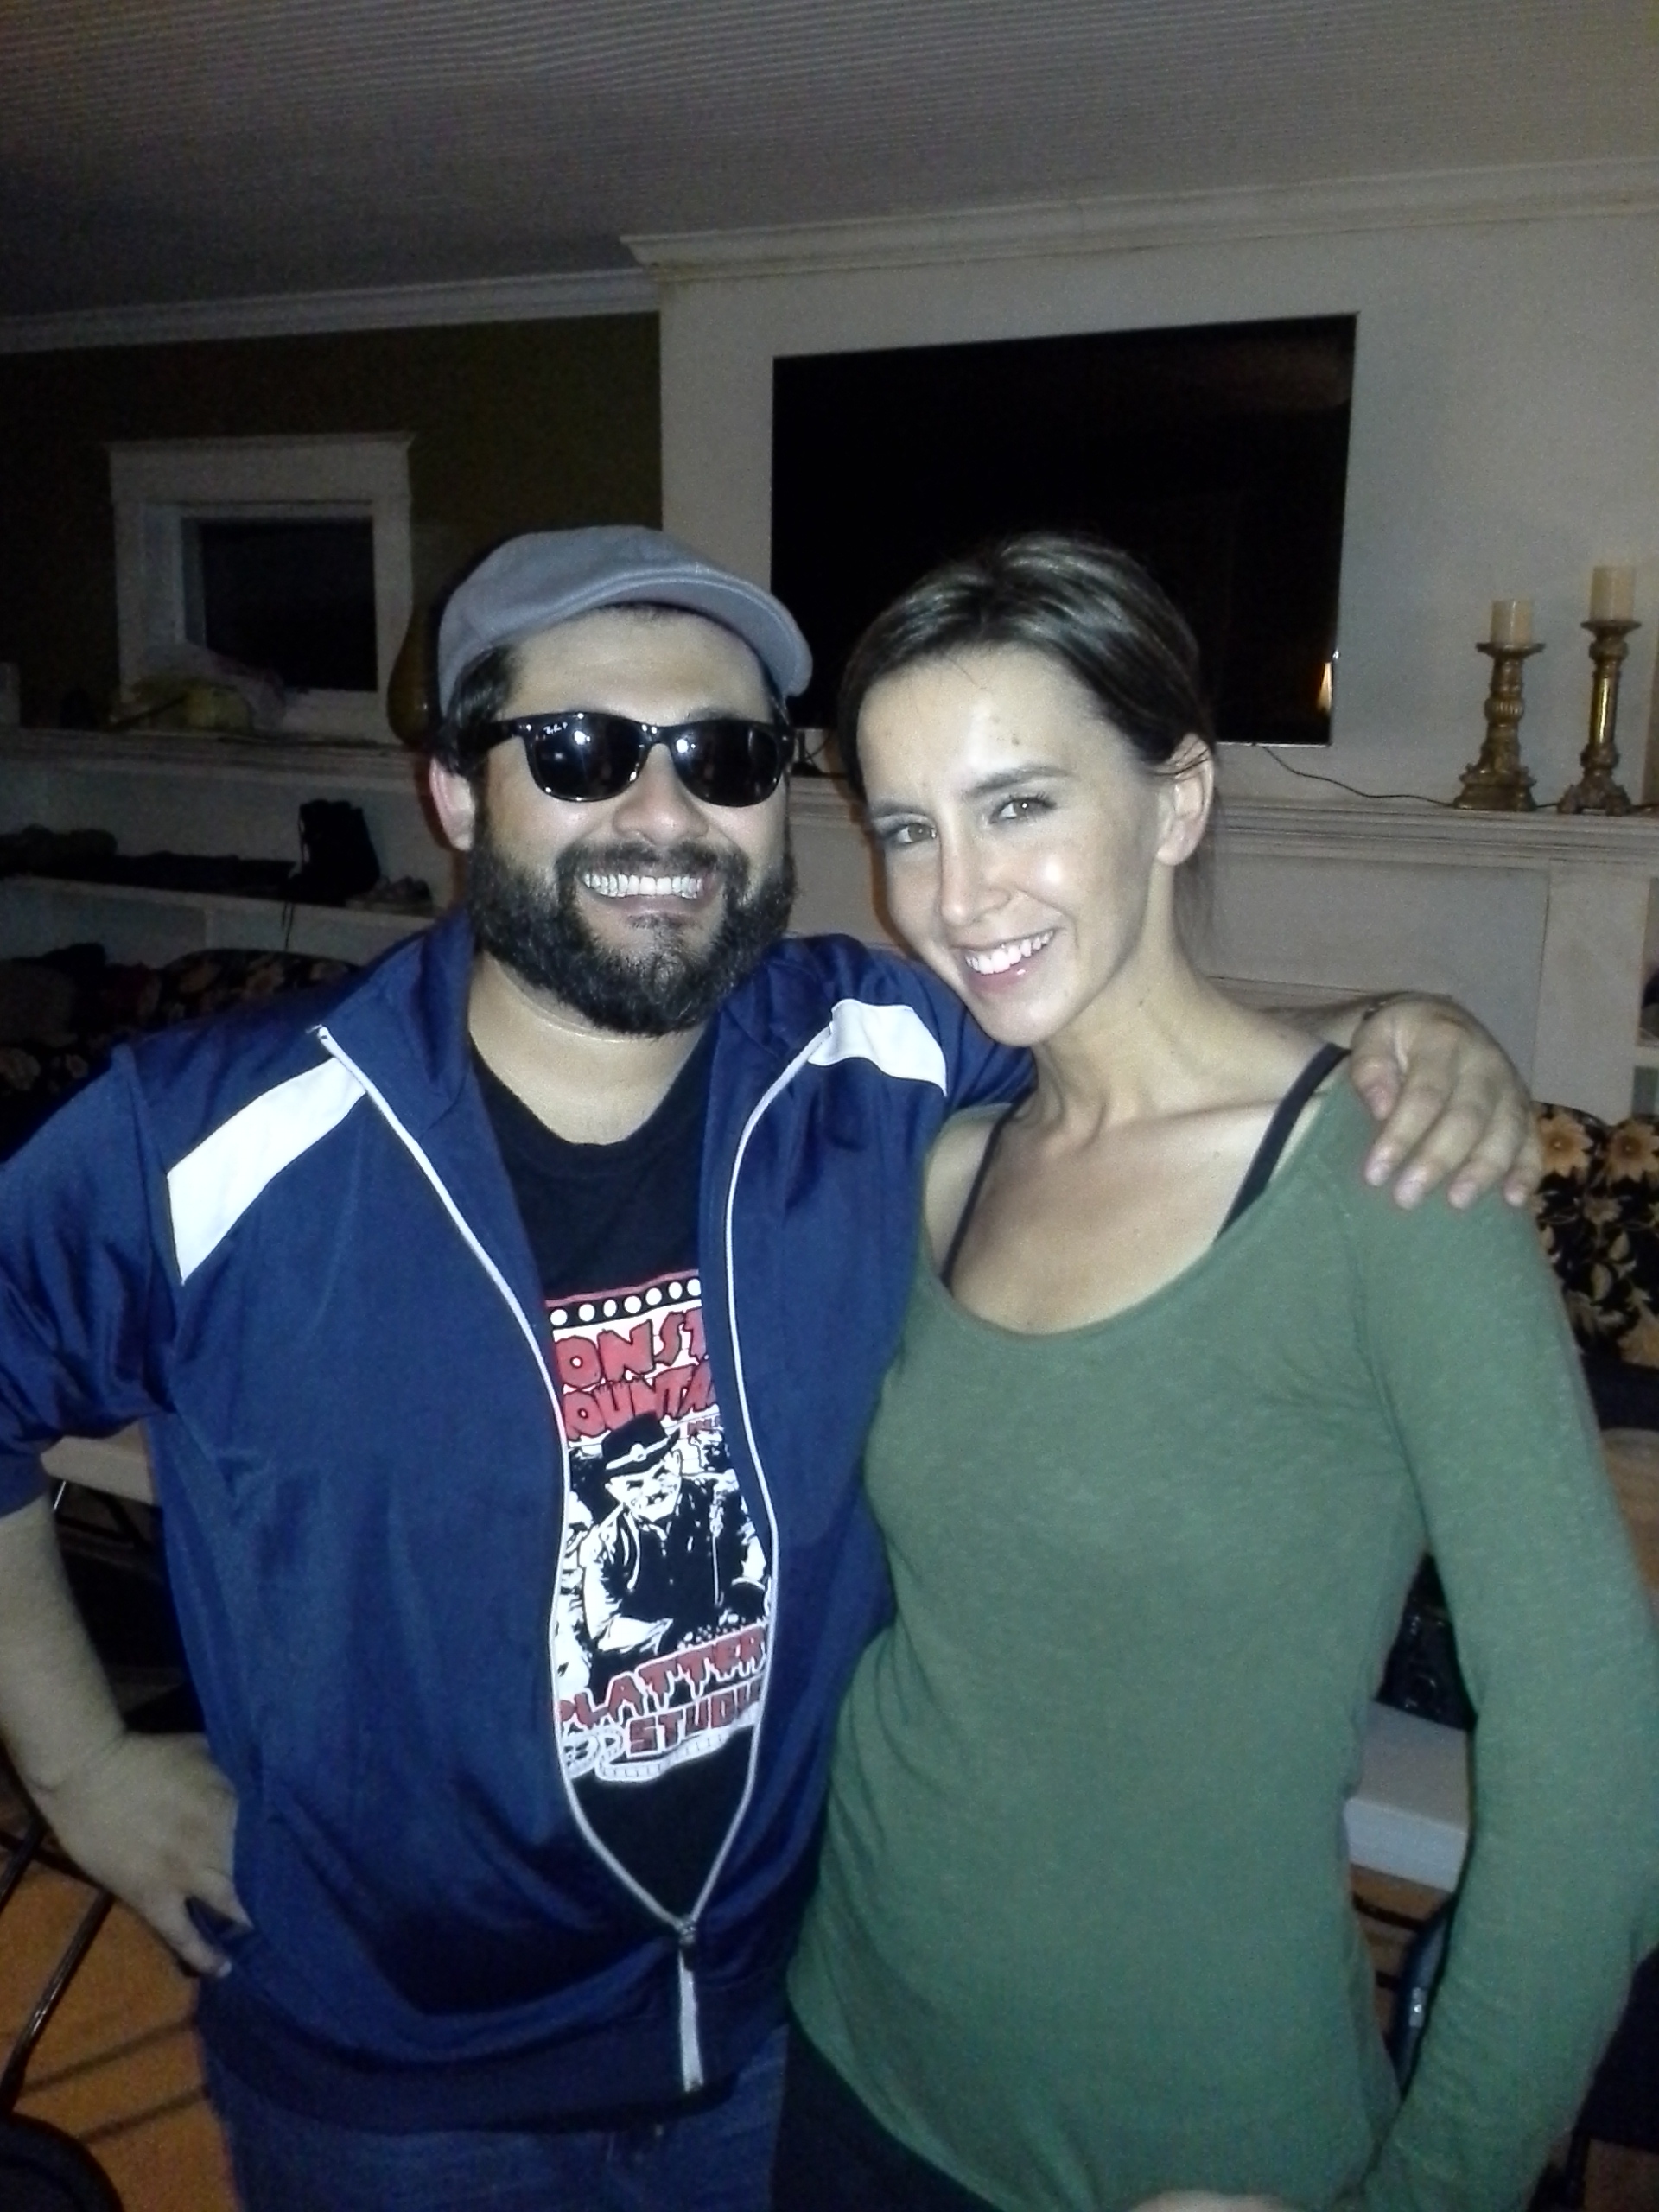 Co-Producer James Morales with Actress/ Writer/ Producer Meredith Majors on set of Lake Eerie 2013